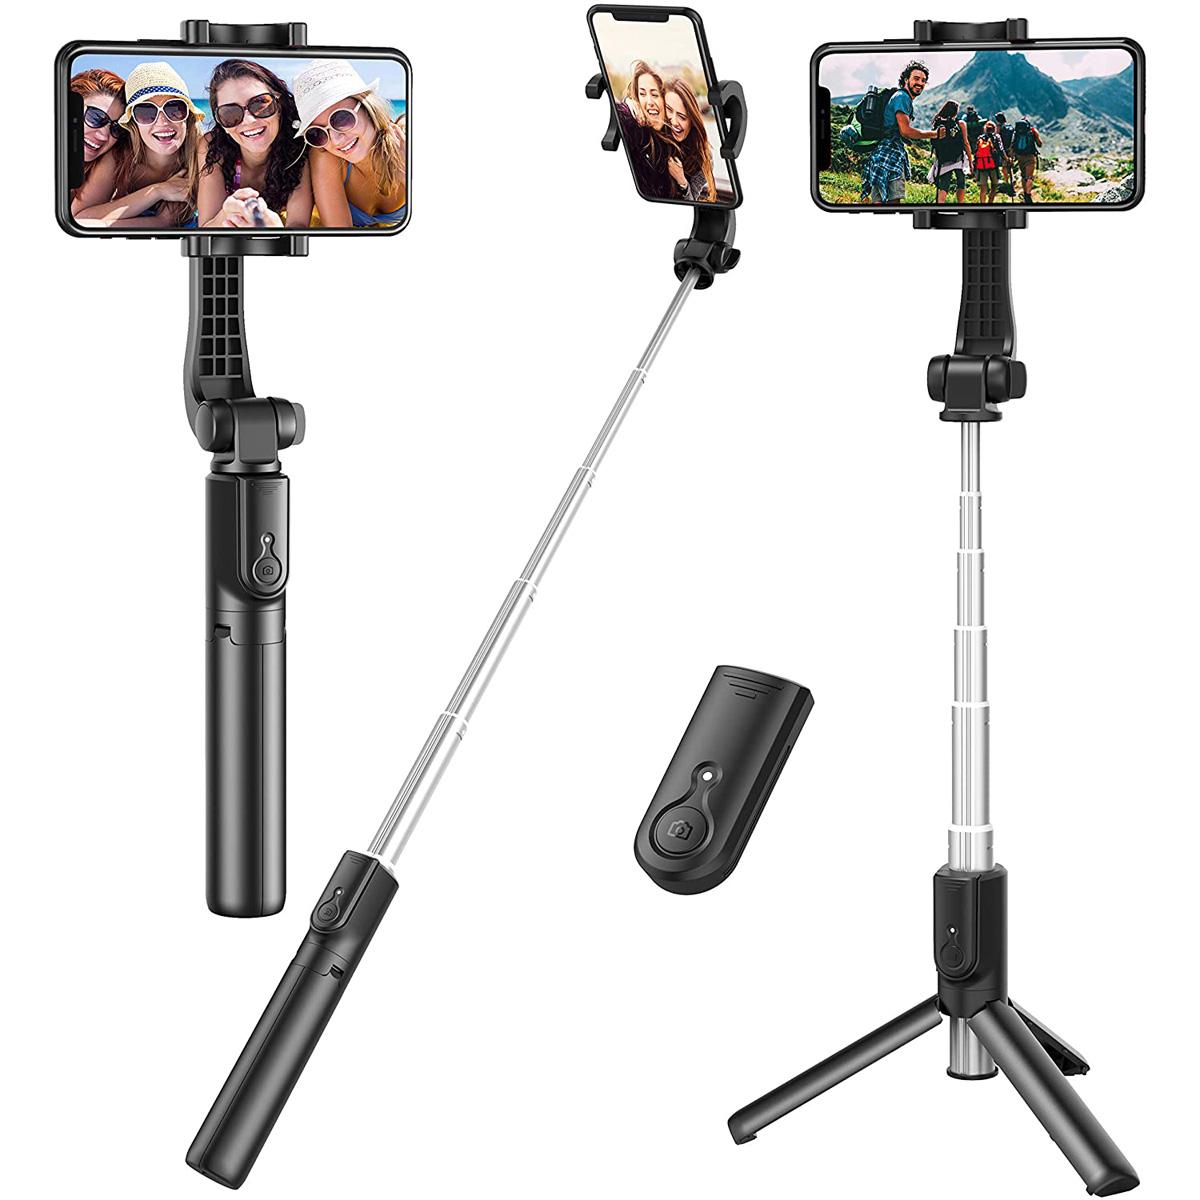 Erligpowht Extendable Selfie Stick Tripod with Detachable Wireless Remote for $14.99